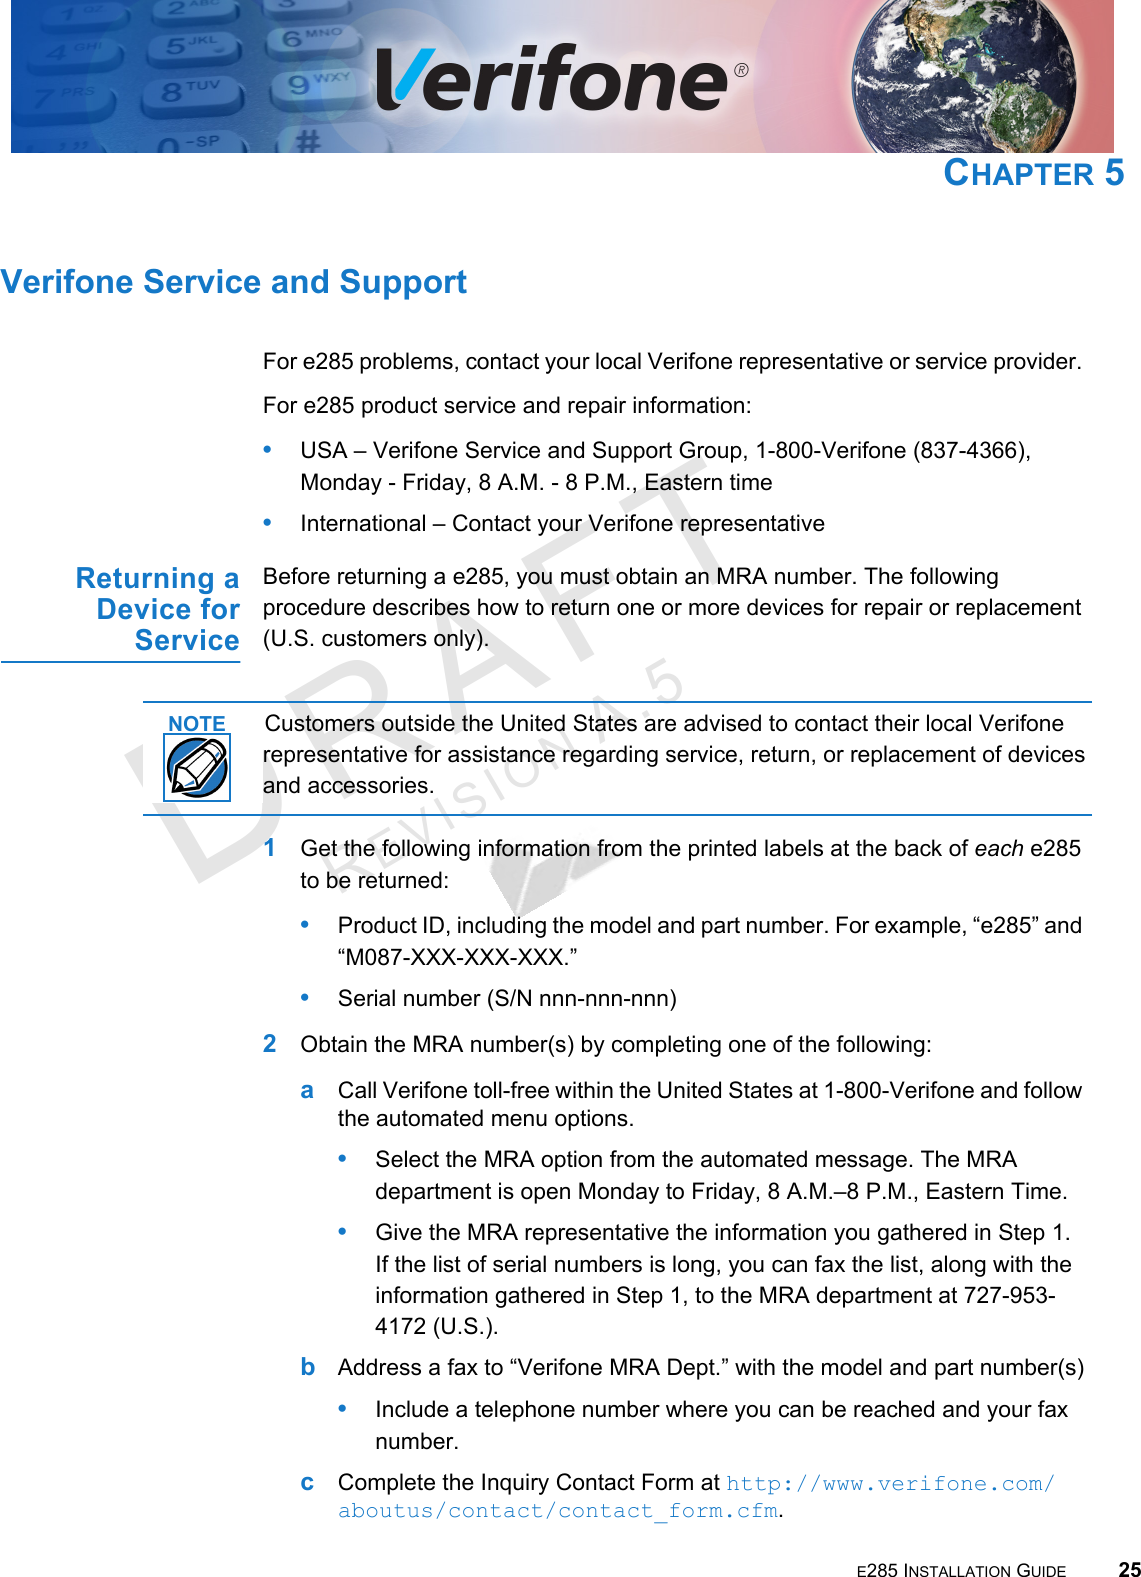 E285 INSTALLATION GUIDE 25DRAFTREVISION A.5 CHAPTER 5Verifone Service and SupportFor e285 problems, contact your local Verifone representative or service provider. For e285 product service and repair information:•USA – Verifone Service and Support Group, 1-800-Verifone (837-4366),  Monday - Friday, 8 A.M. - 8 P.M., Eastern time•International – Contact your Verifone representative Returning a Device for ServiceBefore returning a e285, you must obtain an MRA number. The following procedure describes how to return one or more devices for repair or replacement (U.S. customers only). Customers outside the United States are advised to contact their local Verifone representative for assistance regarding service, return, or replacement of devices and accessories.1Get the following information from the printed labels at the back of each e285 to be returned:•Product ID, including the model and part number. For example, “e285” and “M087-XXX-XXX-XXX.”•Serial number (S/N nnn-nnn-nnn)2Obtain the MRA number(s) by completing one of the following:aCall Verifone toll-free within the United States at 1-800-Verifone and follow the automated menu options.•Select the MRA option from the automated message. The MRA department is open Monday to Friday, 8  A.M.–8  P.M., Eastern Time.•Give the MRA representative the information you gathered in Step 1. If the list of serial numbers is long, you can fax the list, along with the information gathered in Step 1, to the MRA department at 727-953-4172 (U.S.).bAddress a fax to “Verifone MRA Dept.” with the model and part number(s)•Include a telephone number where you can be reached and your fax number.cComplete the Inquiry Contact Form at http://www.verifone.com/aboutus/contact/contact_form.cfm.NOTE